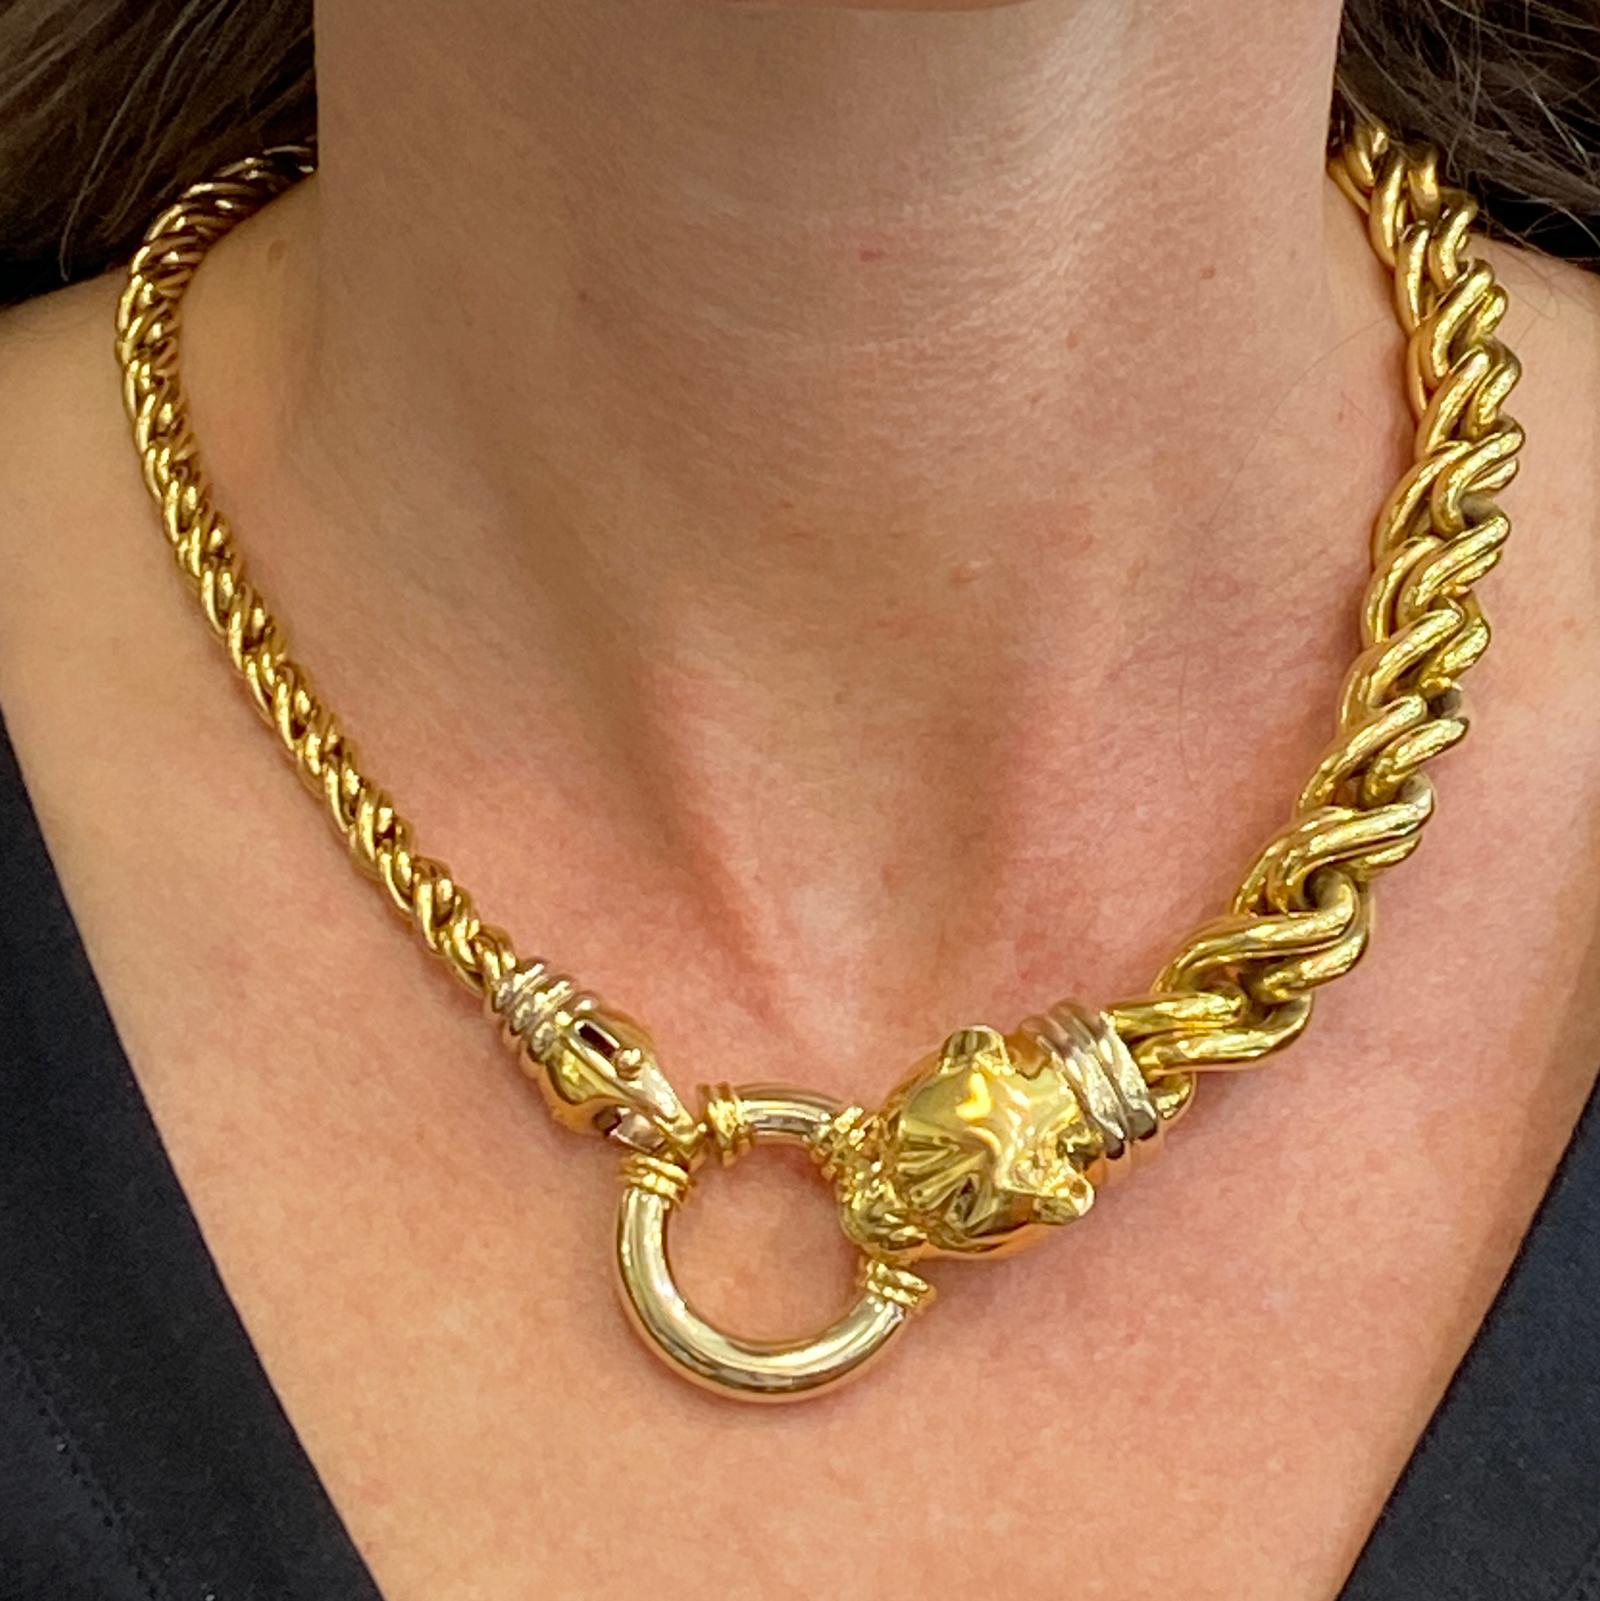 Stylish Italian panther head link necklace fashioned in 18 karat  yellow gold. The graduated twist links measure 6.6-14.5mm in width. The panther head measures .80 x 1.25 inches, and the necklace measures 17 inches in length. Hallmarked with a sun